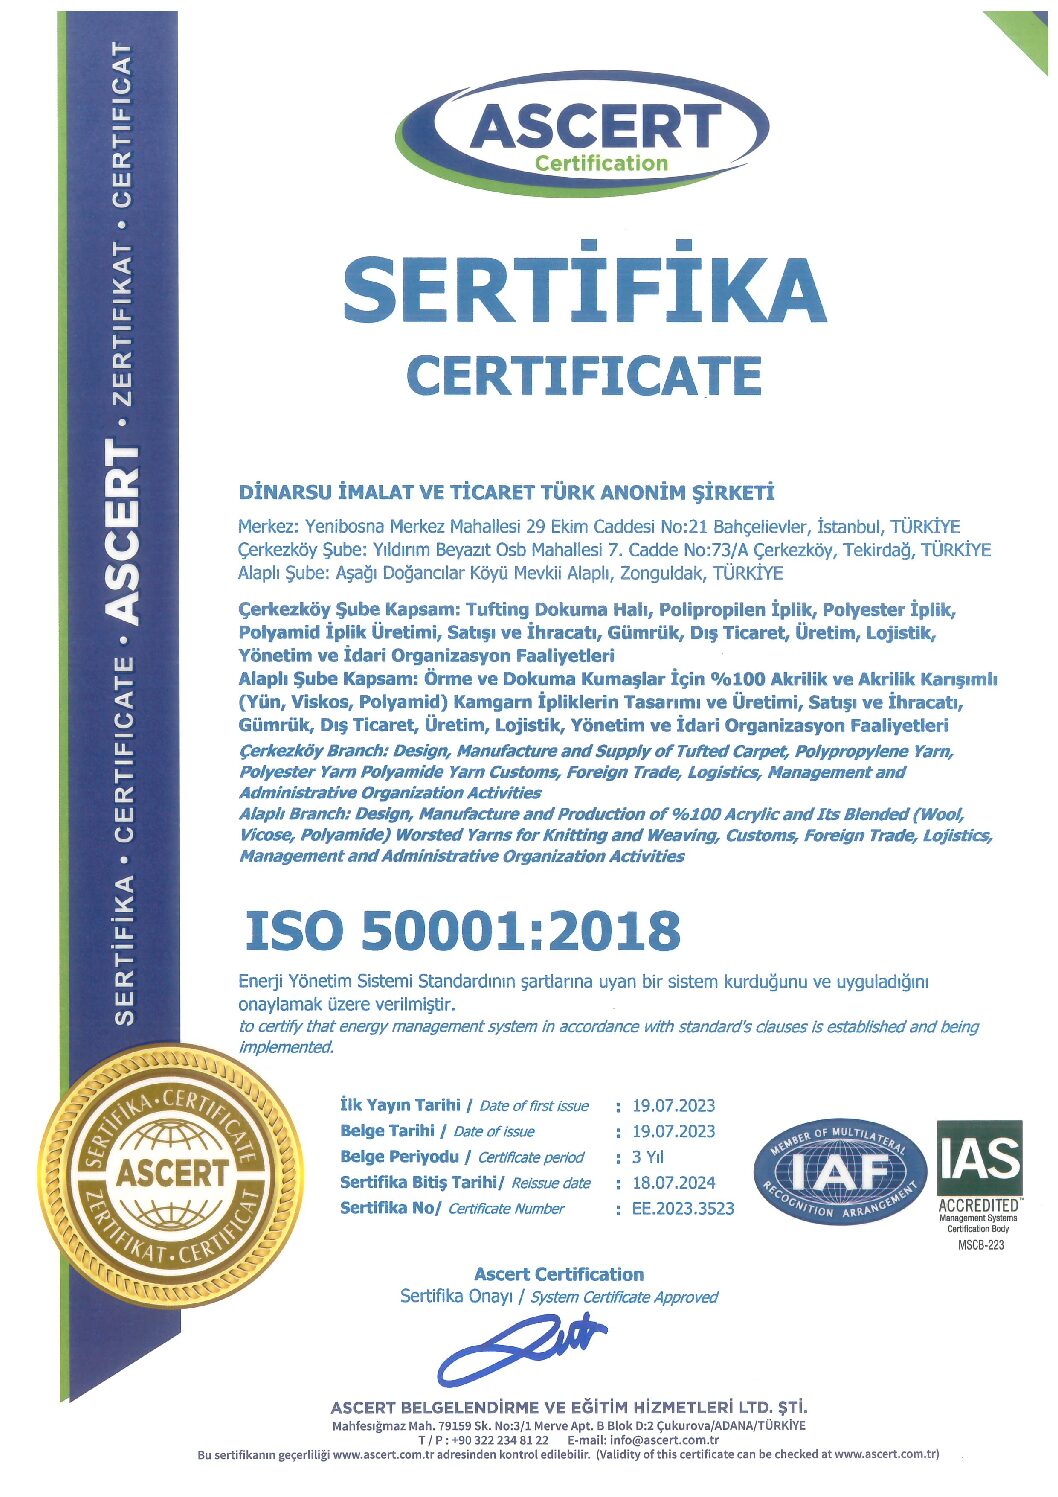 ISO 50001.2018